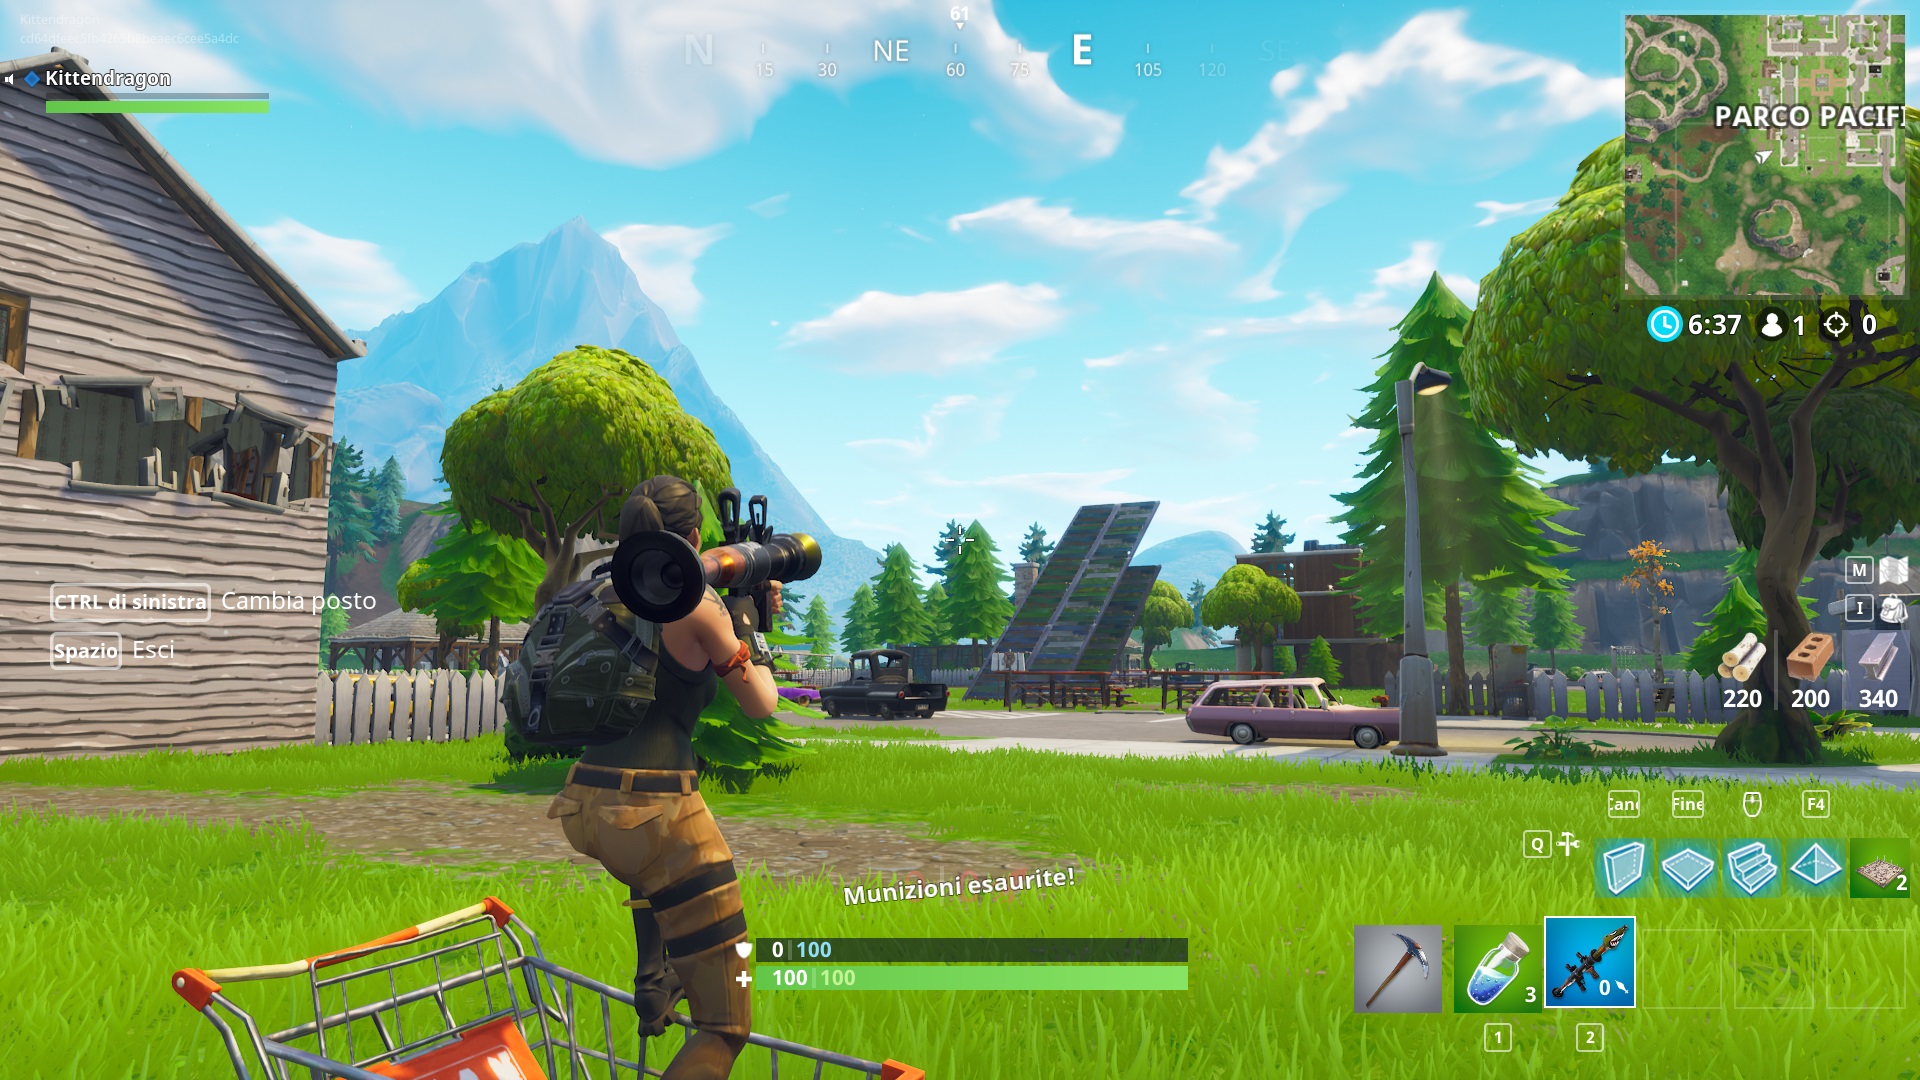 Media asset (photo, screenshot, or image in full size) related to contents posted at 3dfxzone.it | Image Name: Fortnite_Screenshot_3.jpg